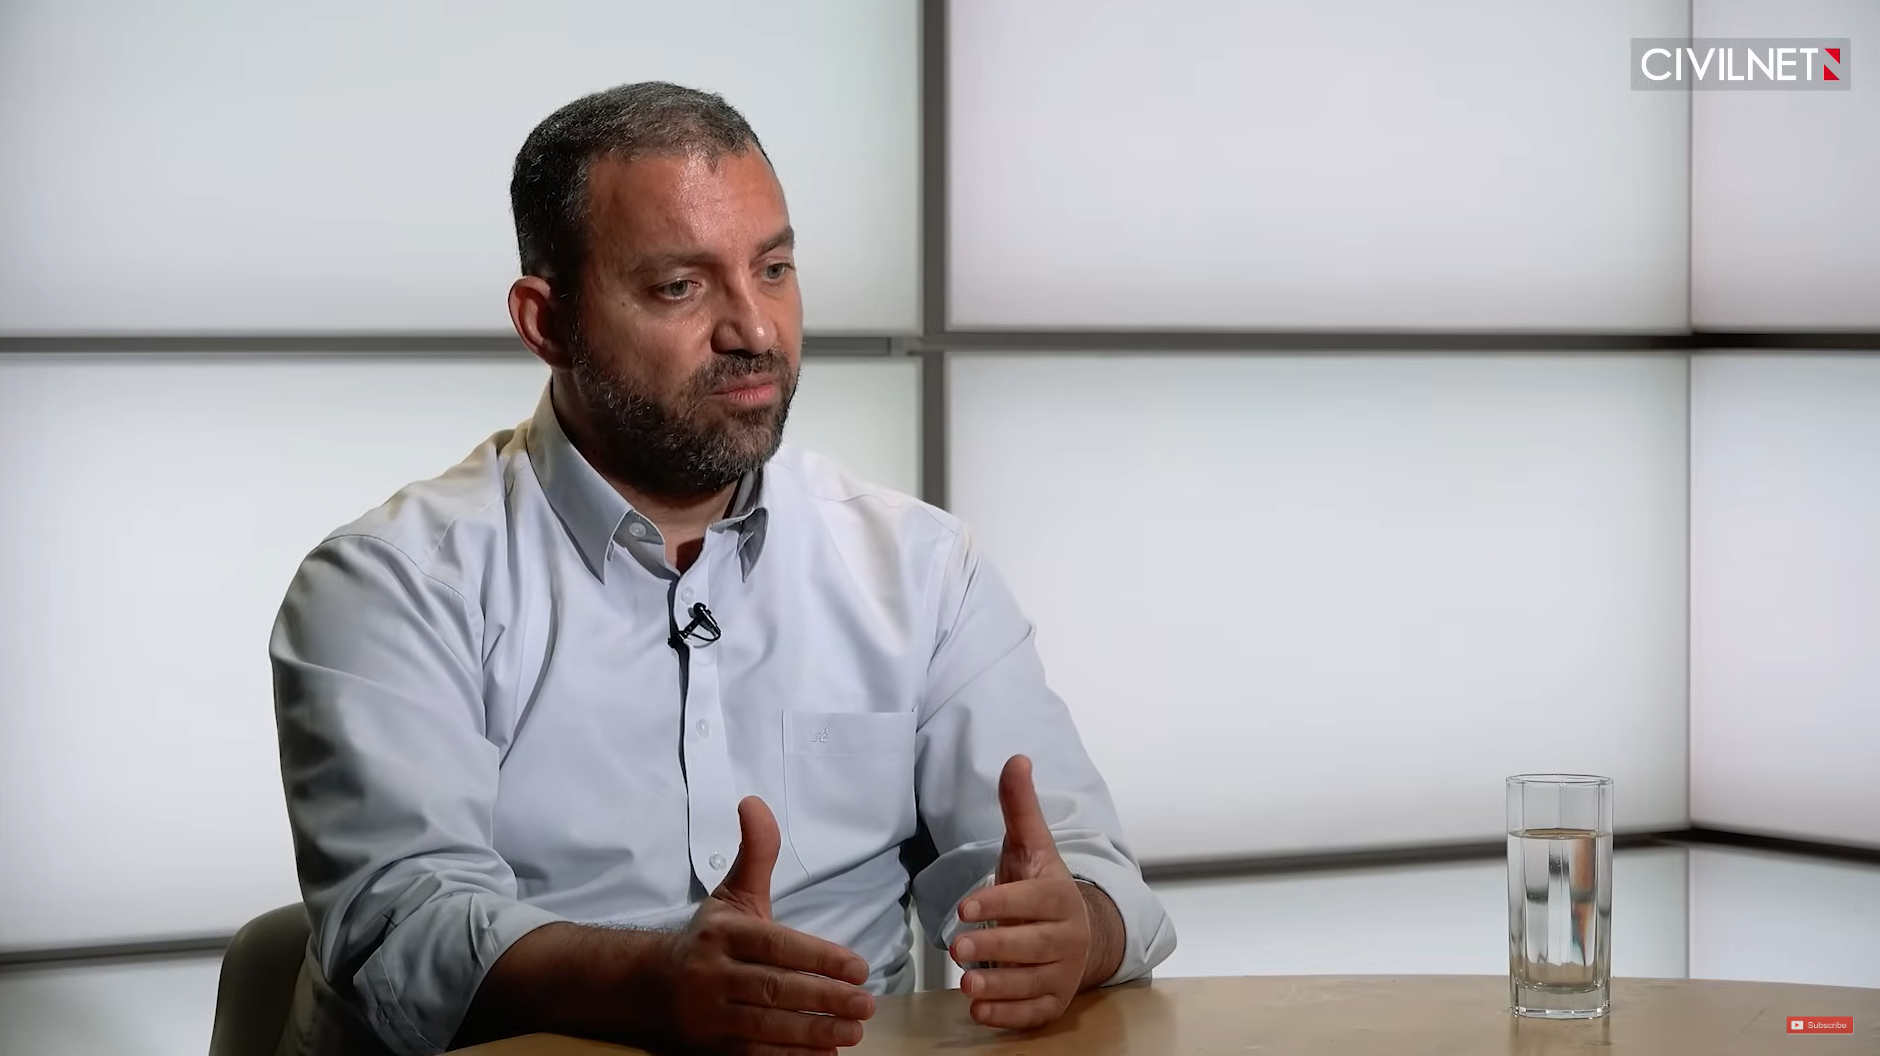 Exclusive: Former Economy Minister Kerobyan talks criminal charges, time in office